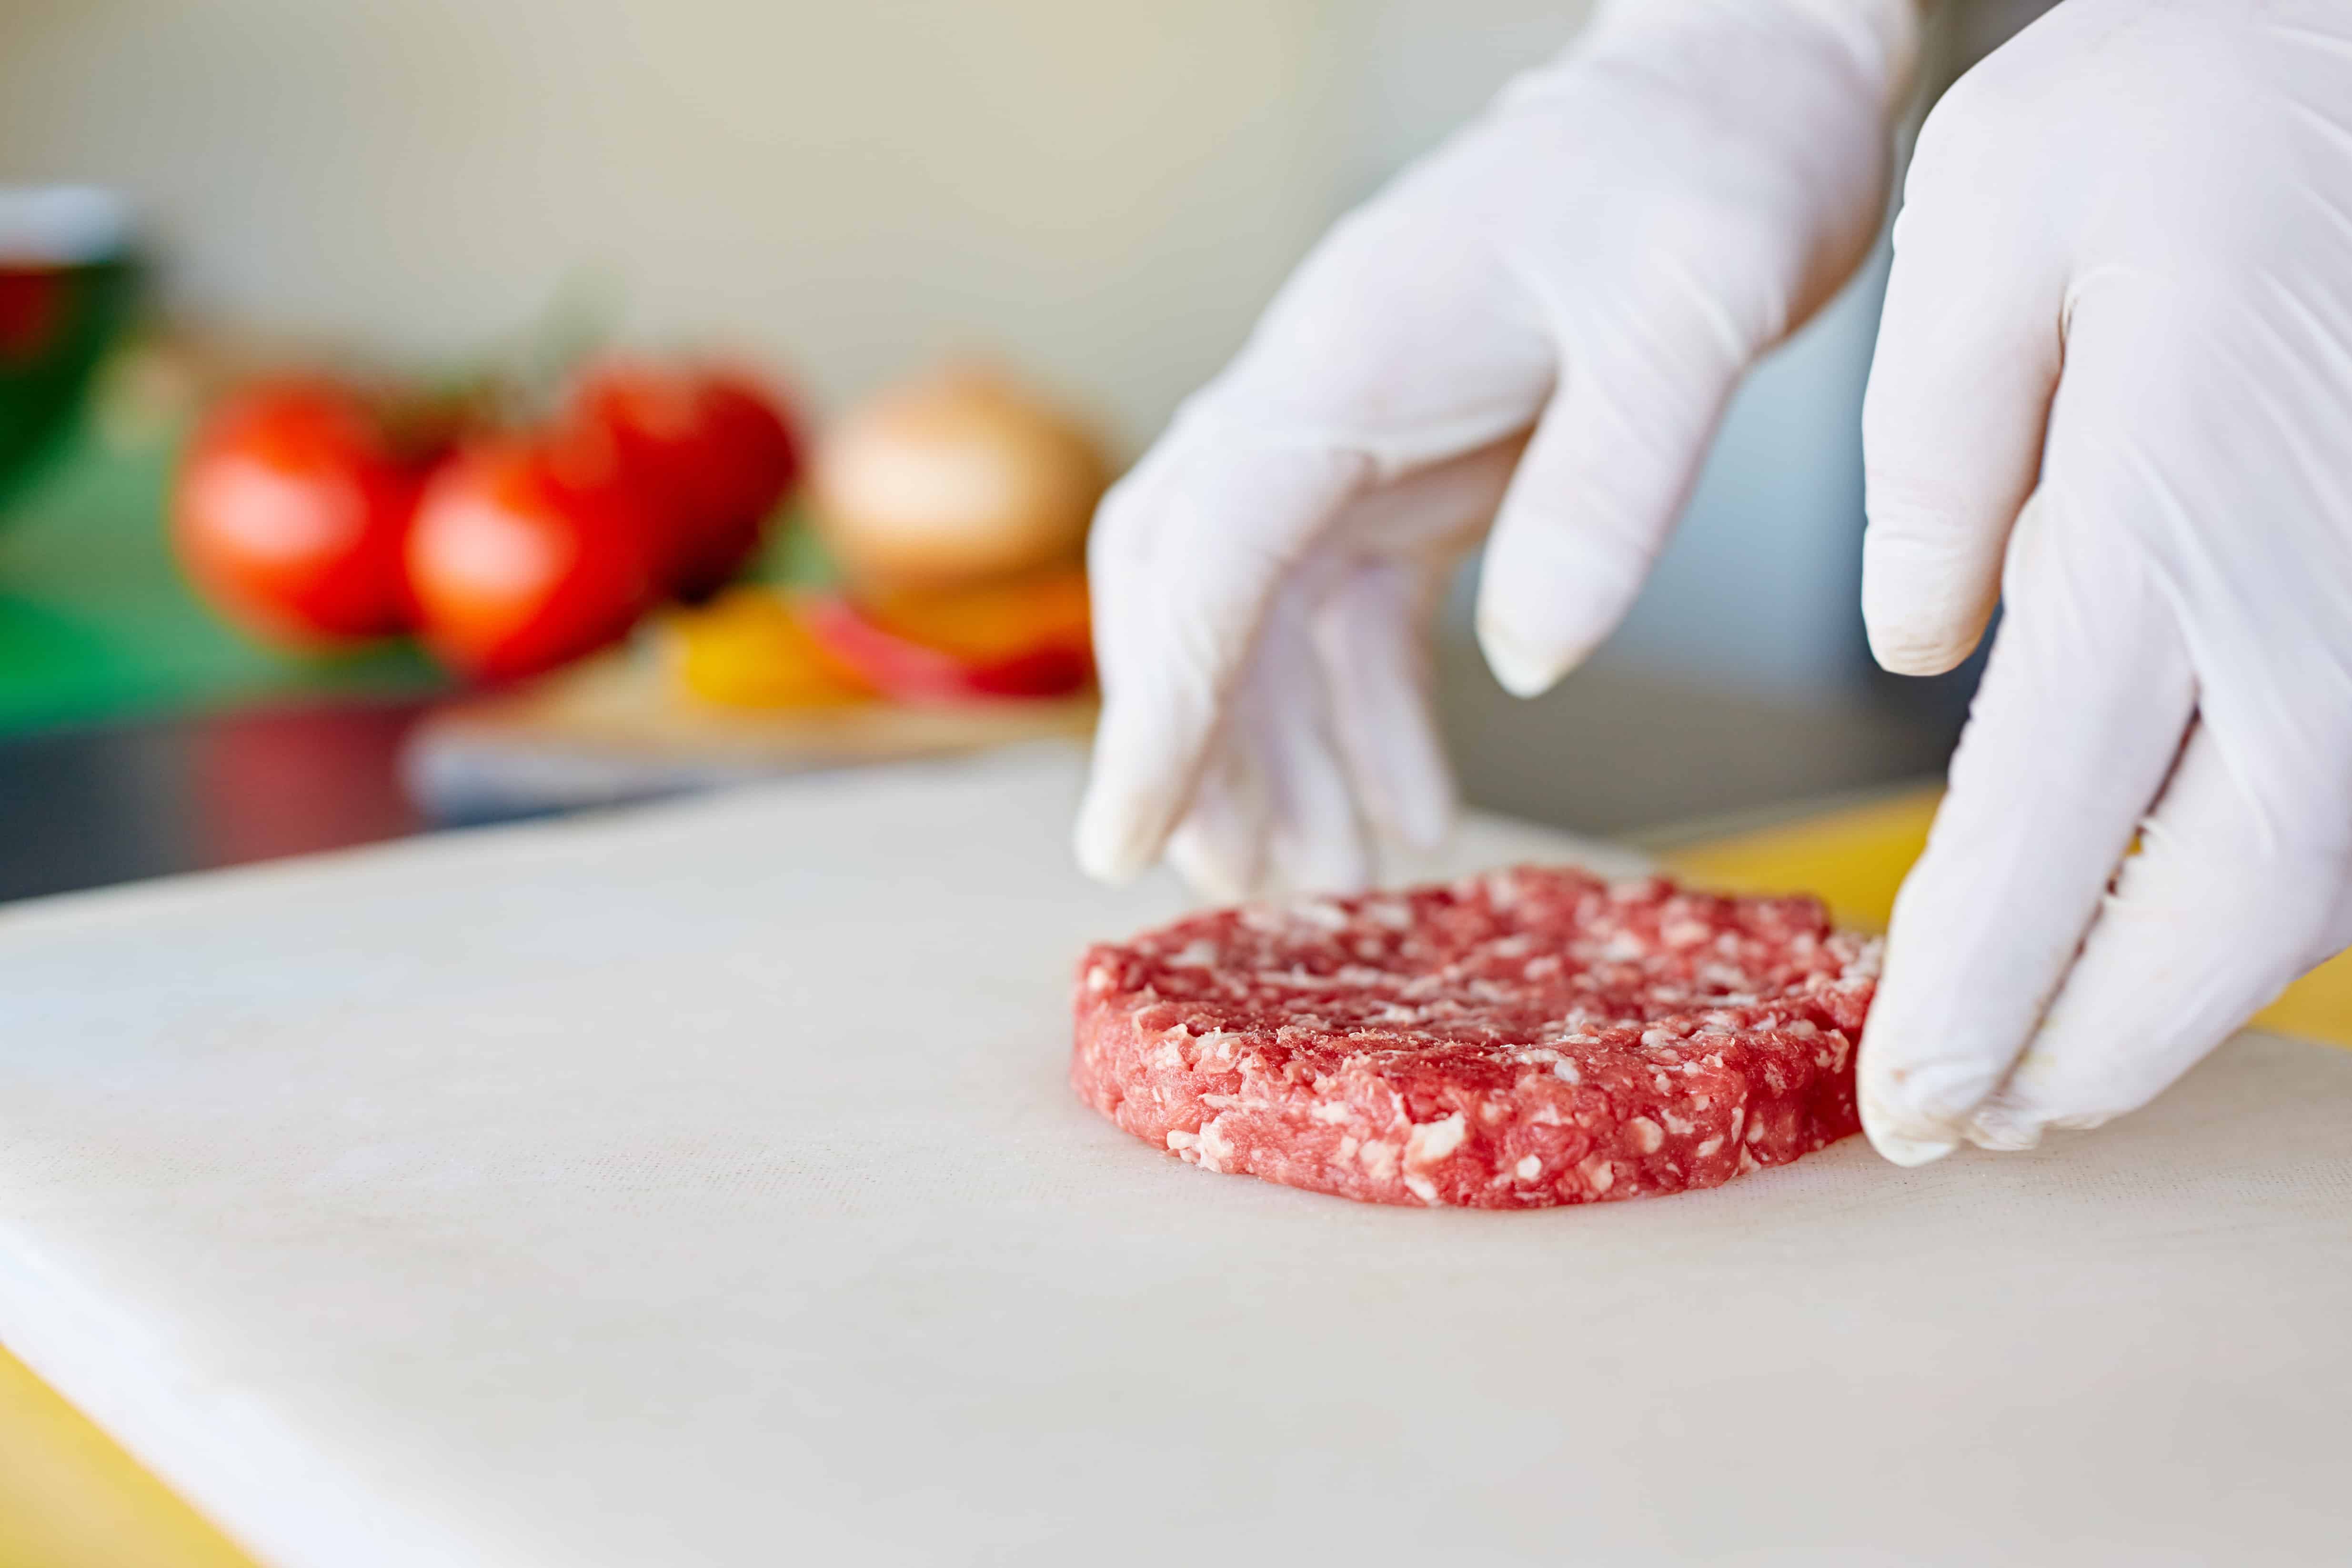 10 Tips for Making a Better Burger